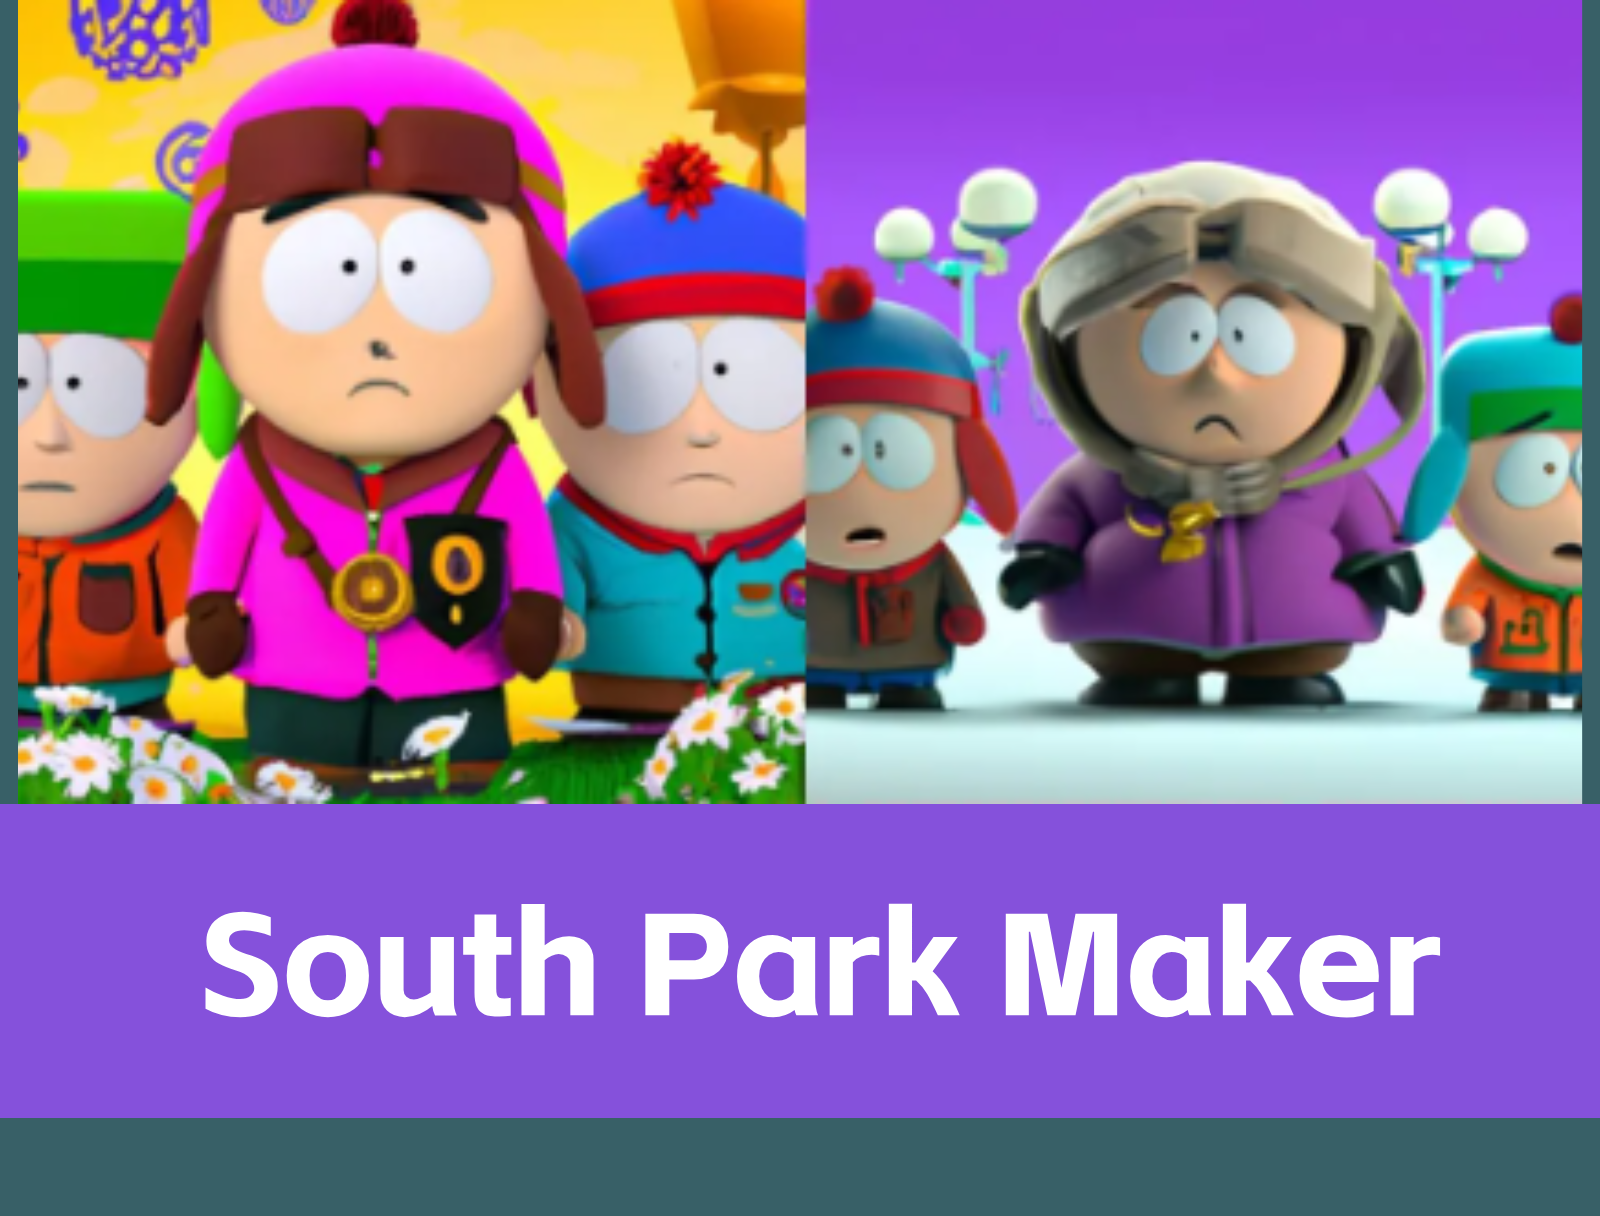 "10 Hilarious South Park Maker Creations You Need to See"